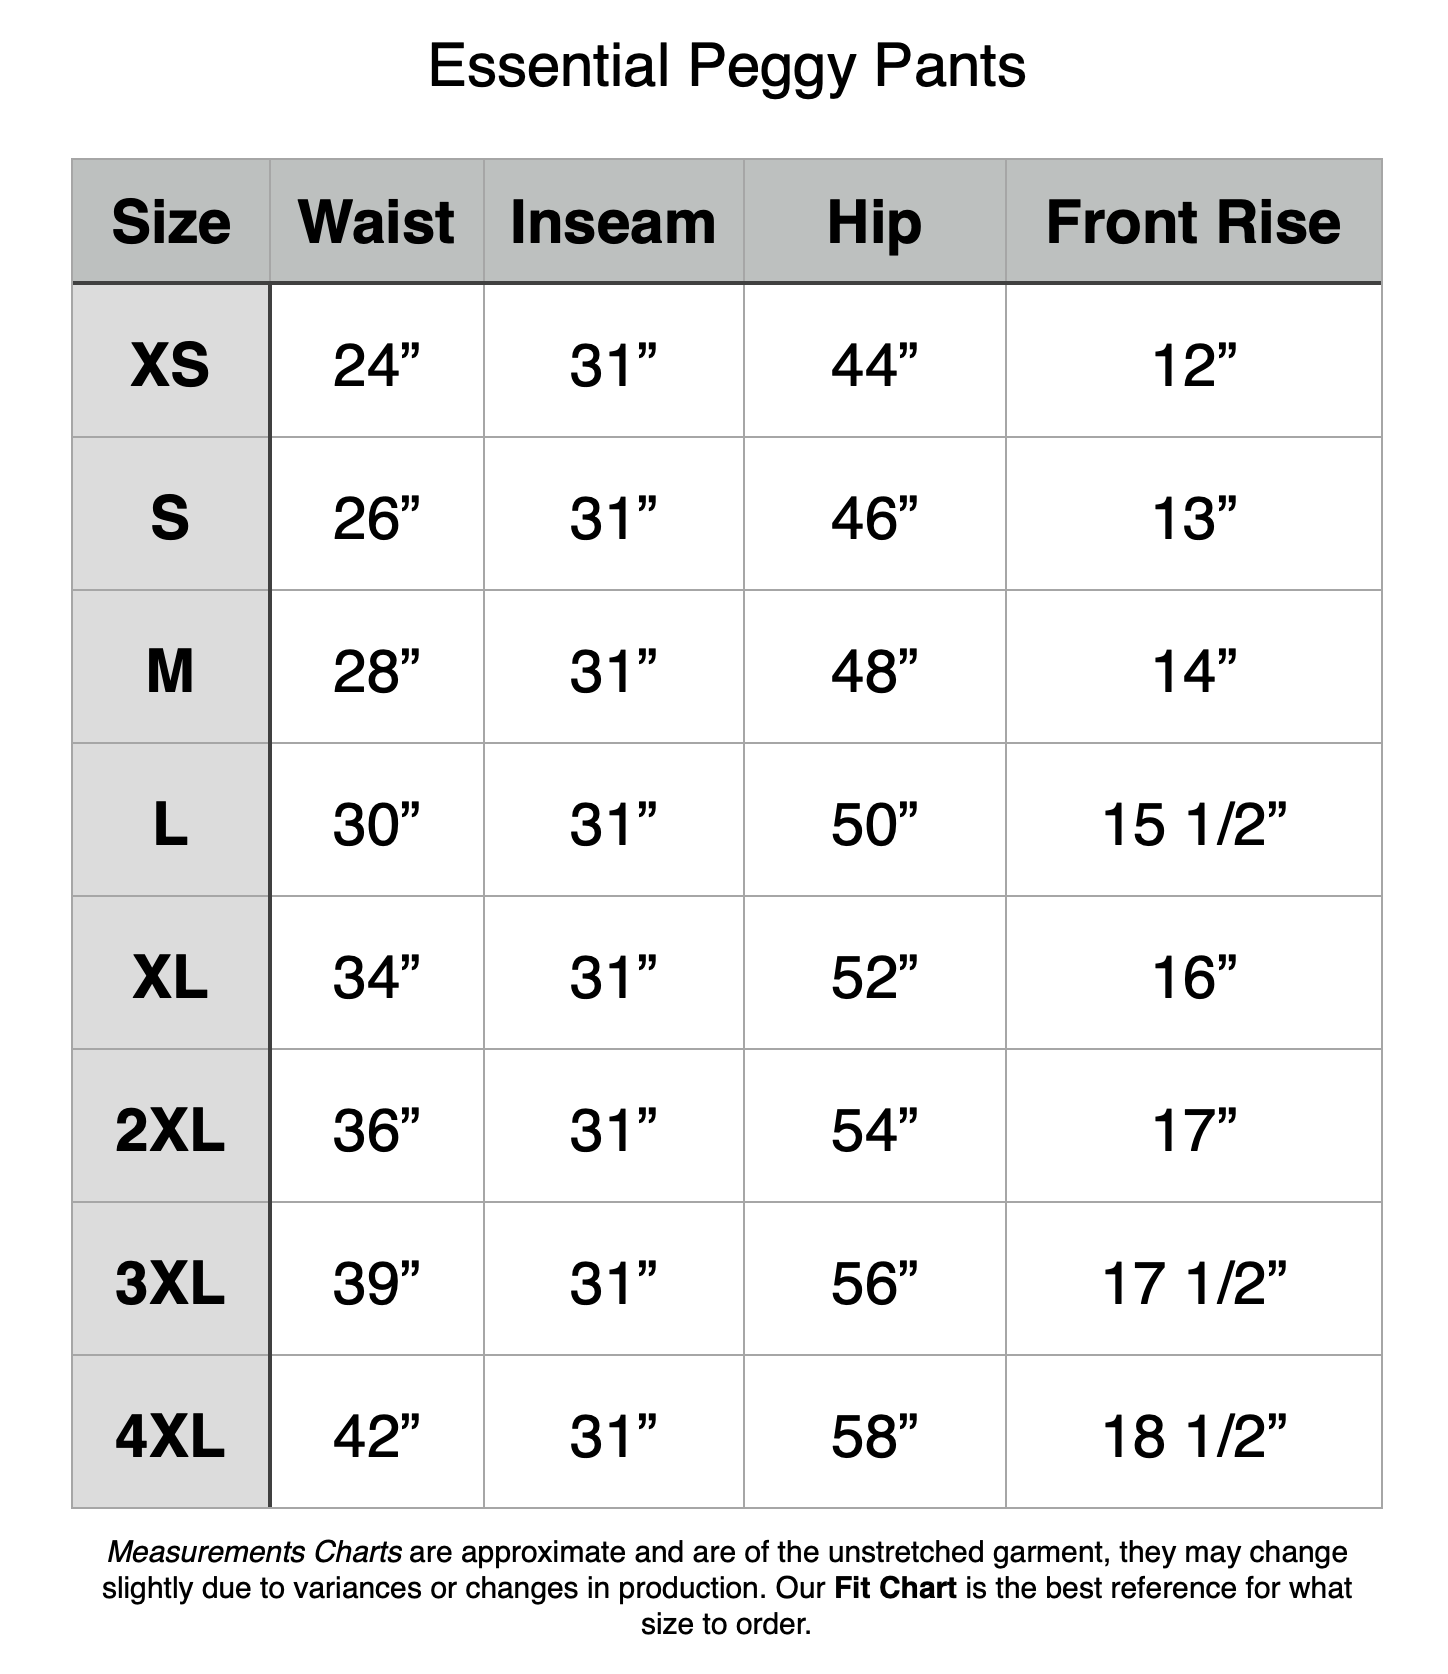 Essential Peggy Pant: XS - 24" Waist, 31" Inseam, 44" Hip, 12" Front Rise.   S - 26" Waist, 31" Inseam, 46" Hip, 13" Front Rise. M - 28" Waist, 31" Inseam, 48" Hip, 14" Front Rise. L - 30" Waist, 31" Inseam, 50" Hip, 15.5" Front Rise. XL - 34" Waist, 31" Inseam, 52" Hip, 16" Front Rise. 2XL - 36" Waist, 31" Inseam, 54" Hip, 17" Front Rise. 3XL - 39" Waist, 31" Inseam, 56" Hip, 17.5" Front Rise. 4XL - 42" Waist, 31" Inseam, 58" Hip, 18.5" Front Rise.